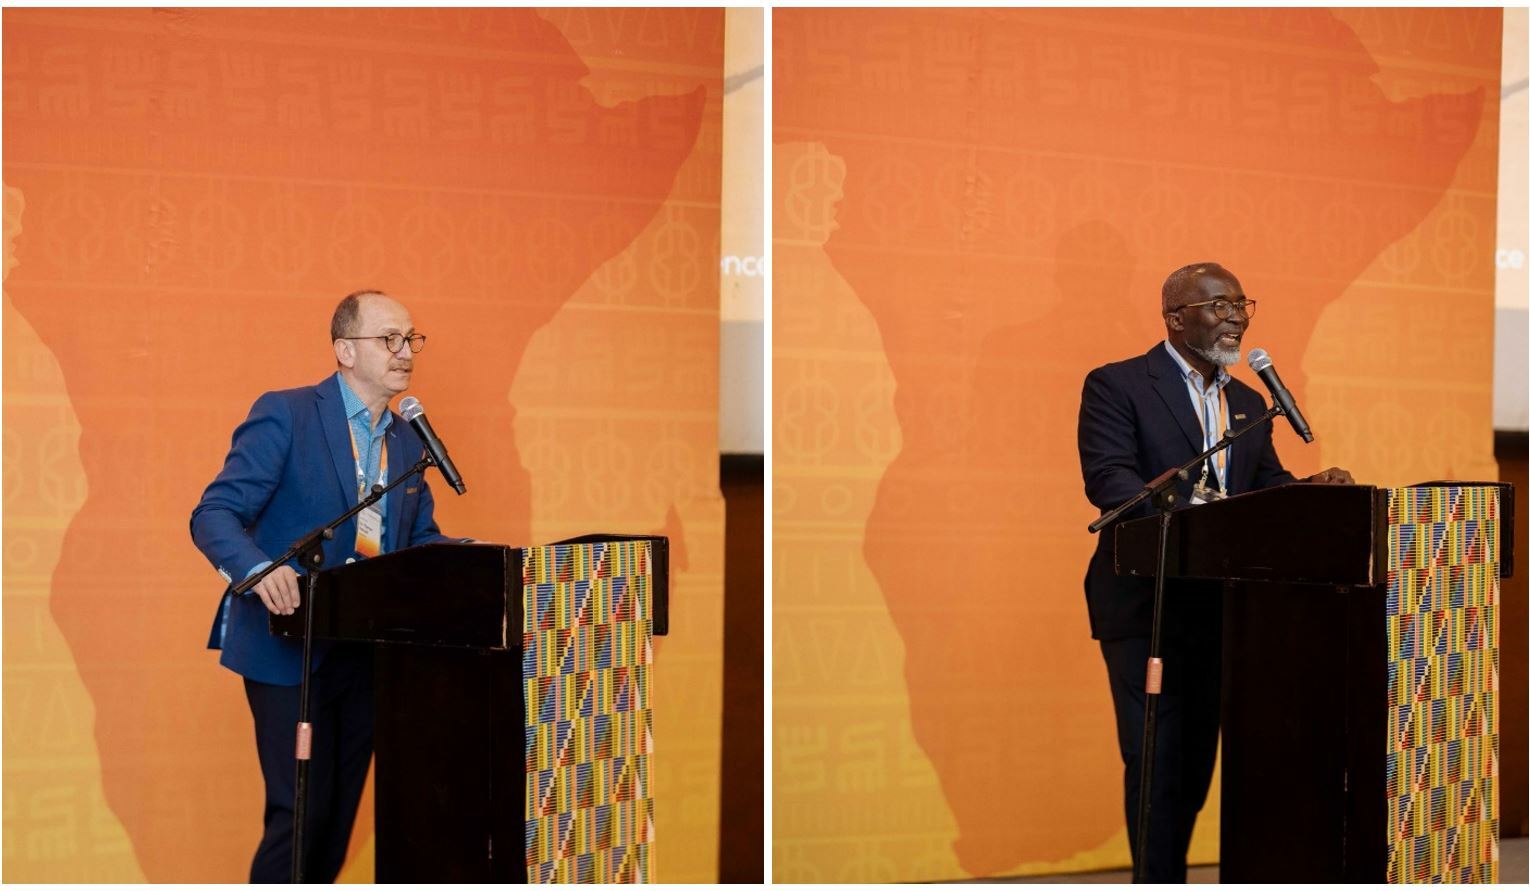 The image shows two technical sessions taking place during Rocscience Africa Conference